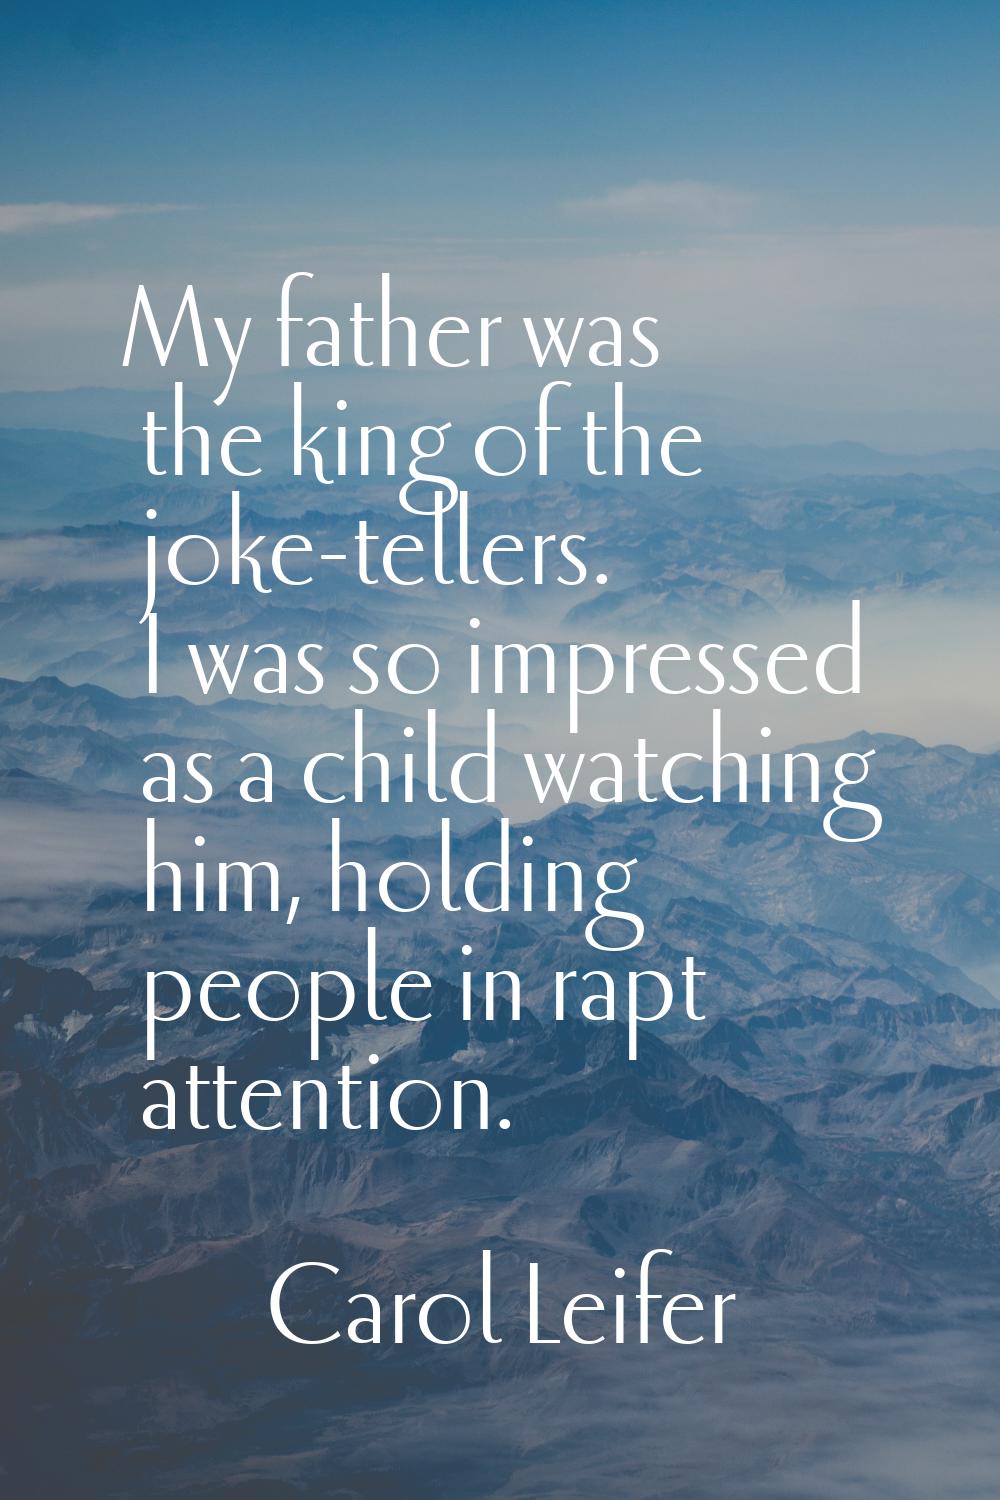 My father was the king of the joke-tellers. I was so impressed as a child watching him, holding peo